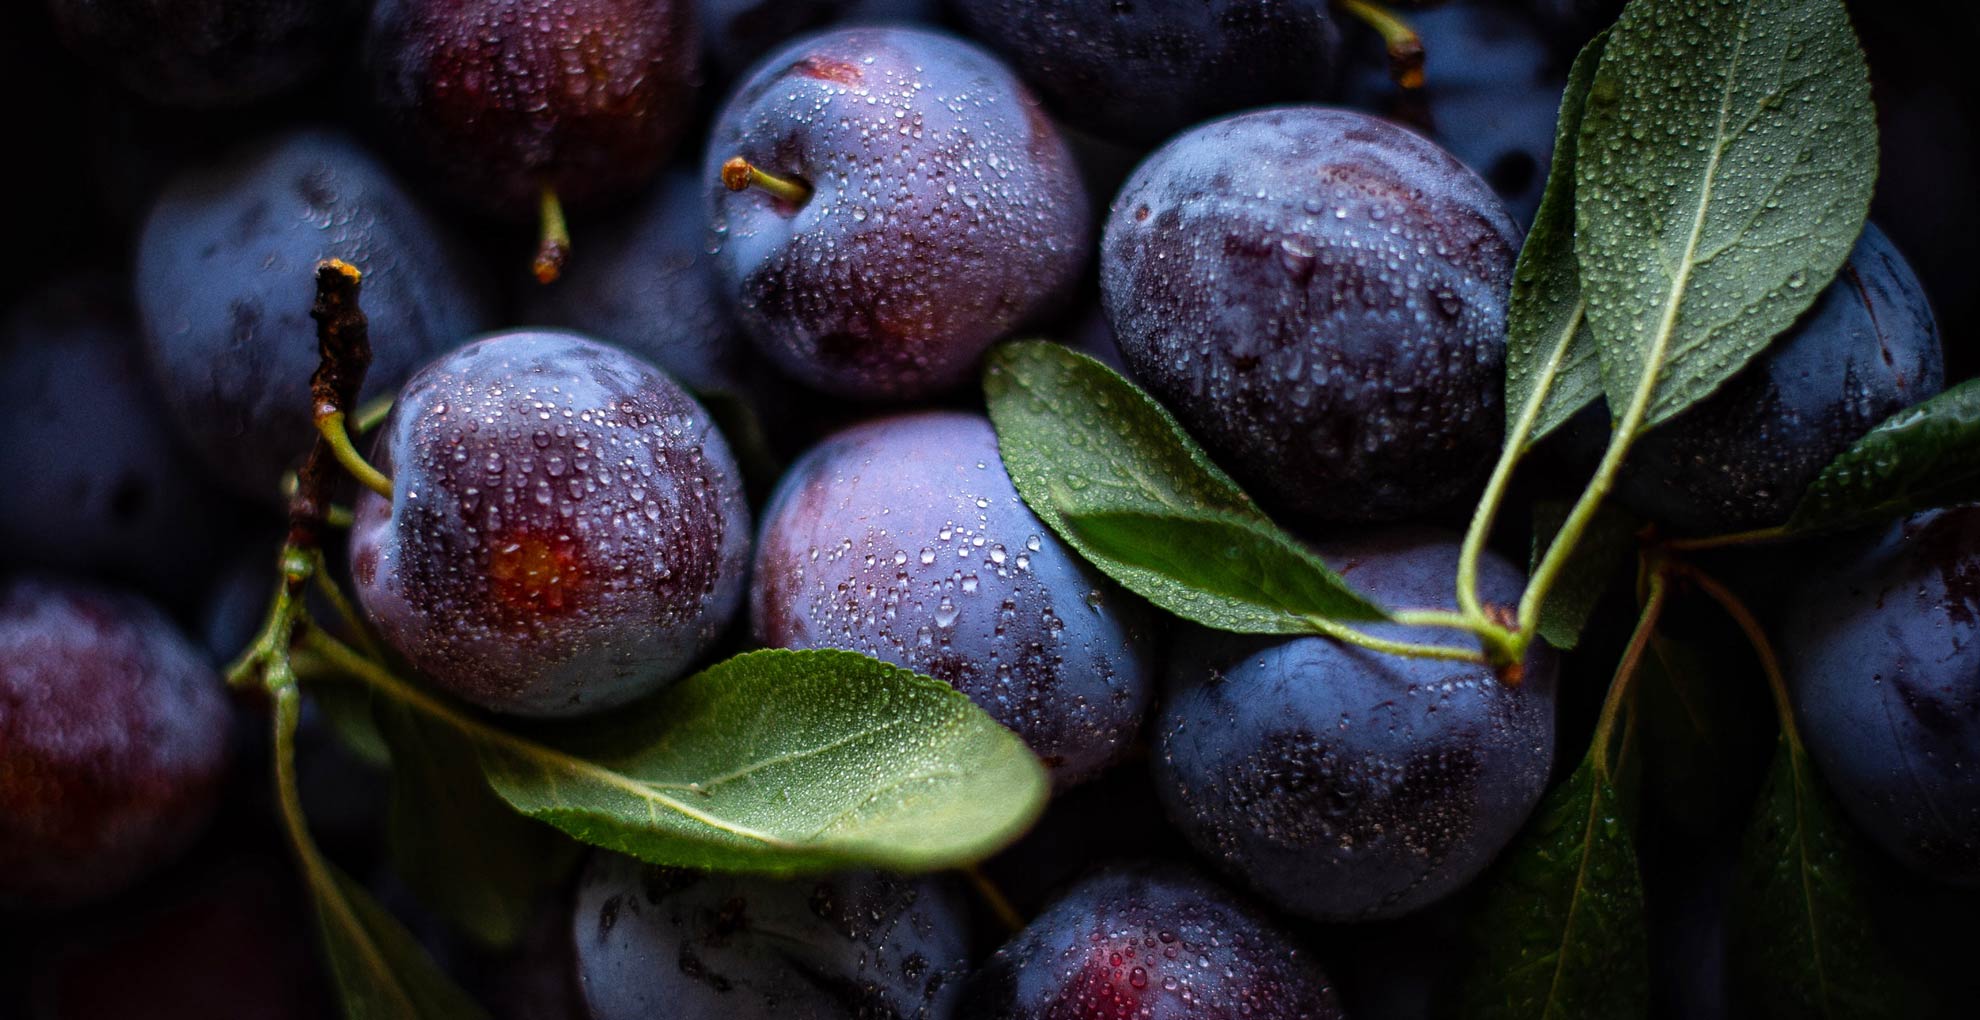 Study participants wanted for new UOW research into potential benefits of purple foods